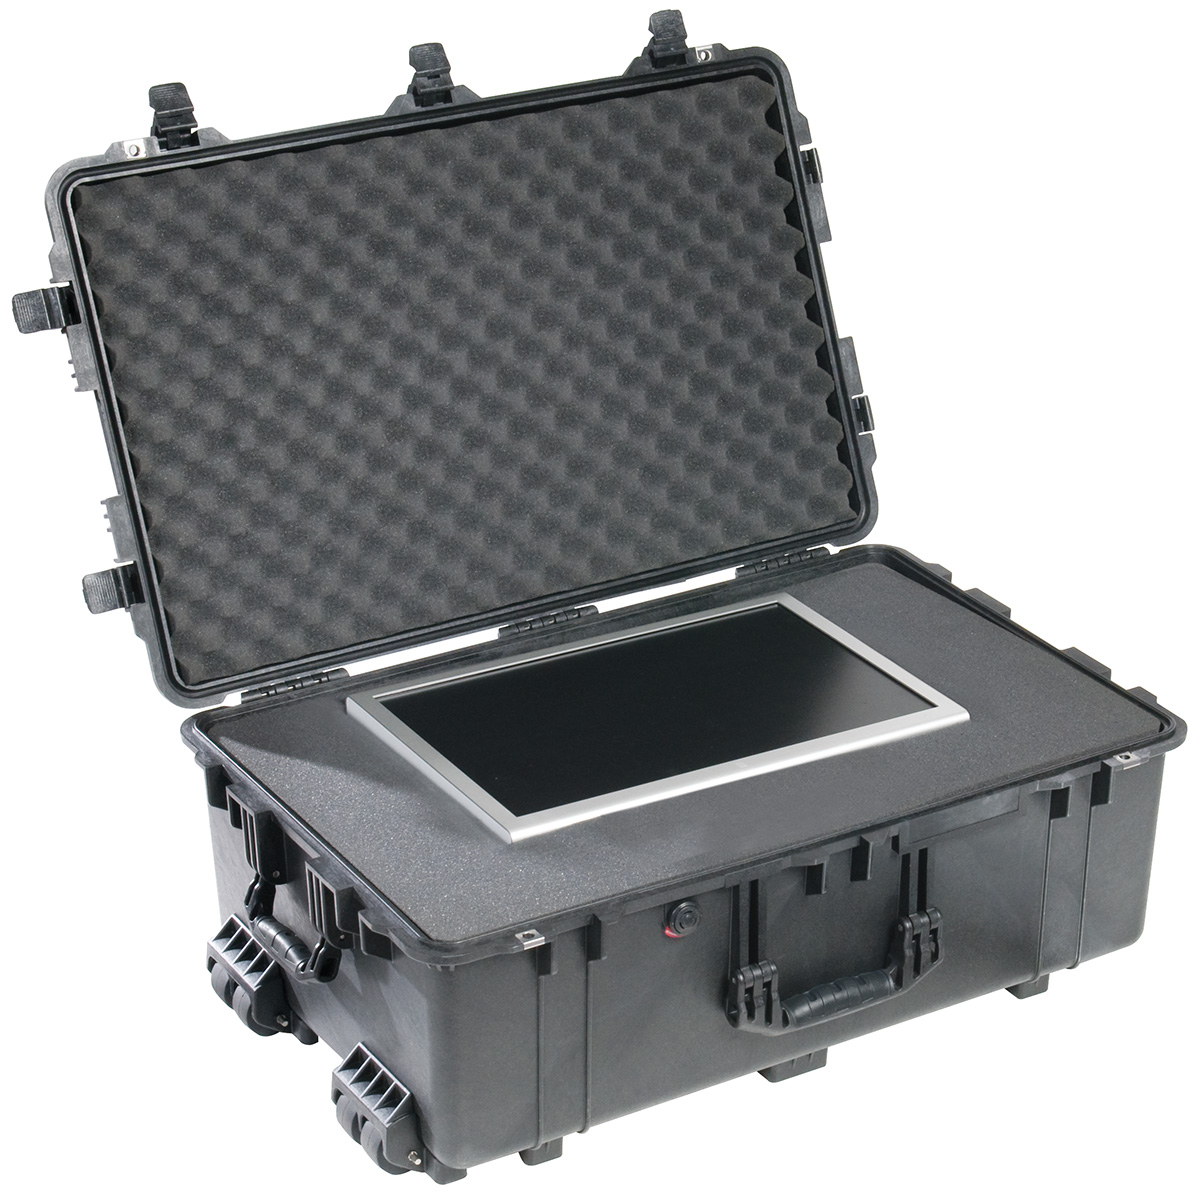 Pelican 1650 Protector Case from Columbia Safety